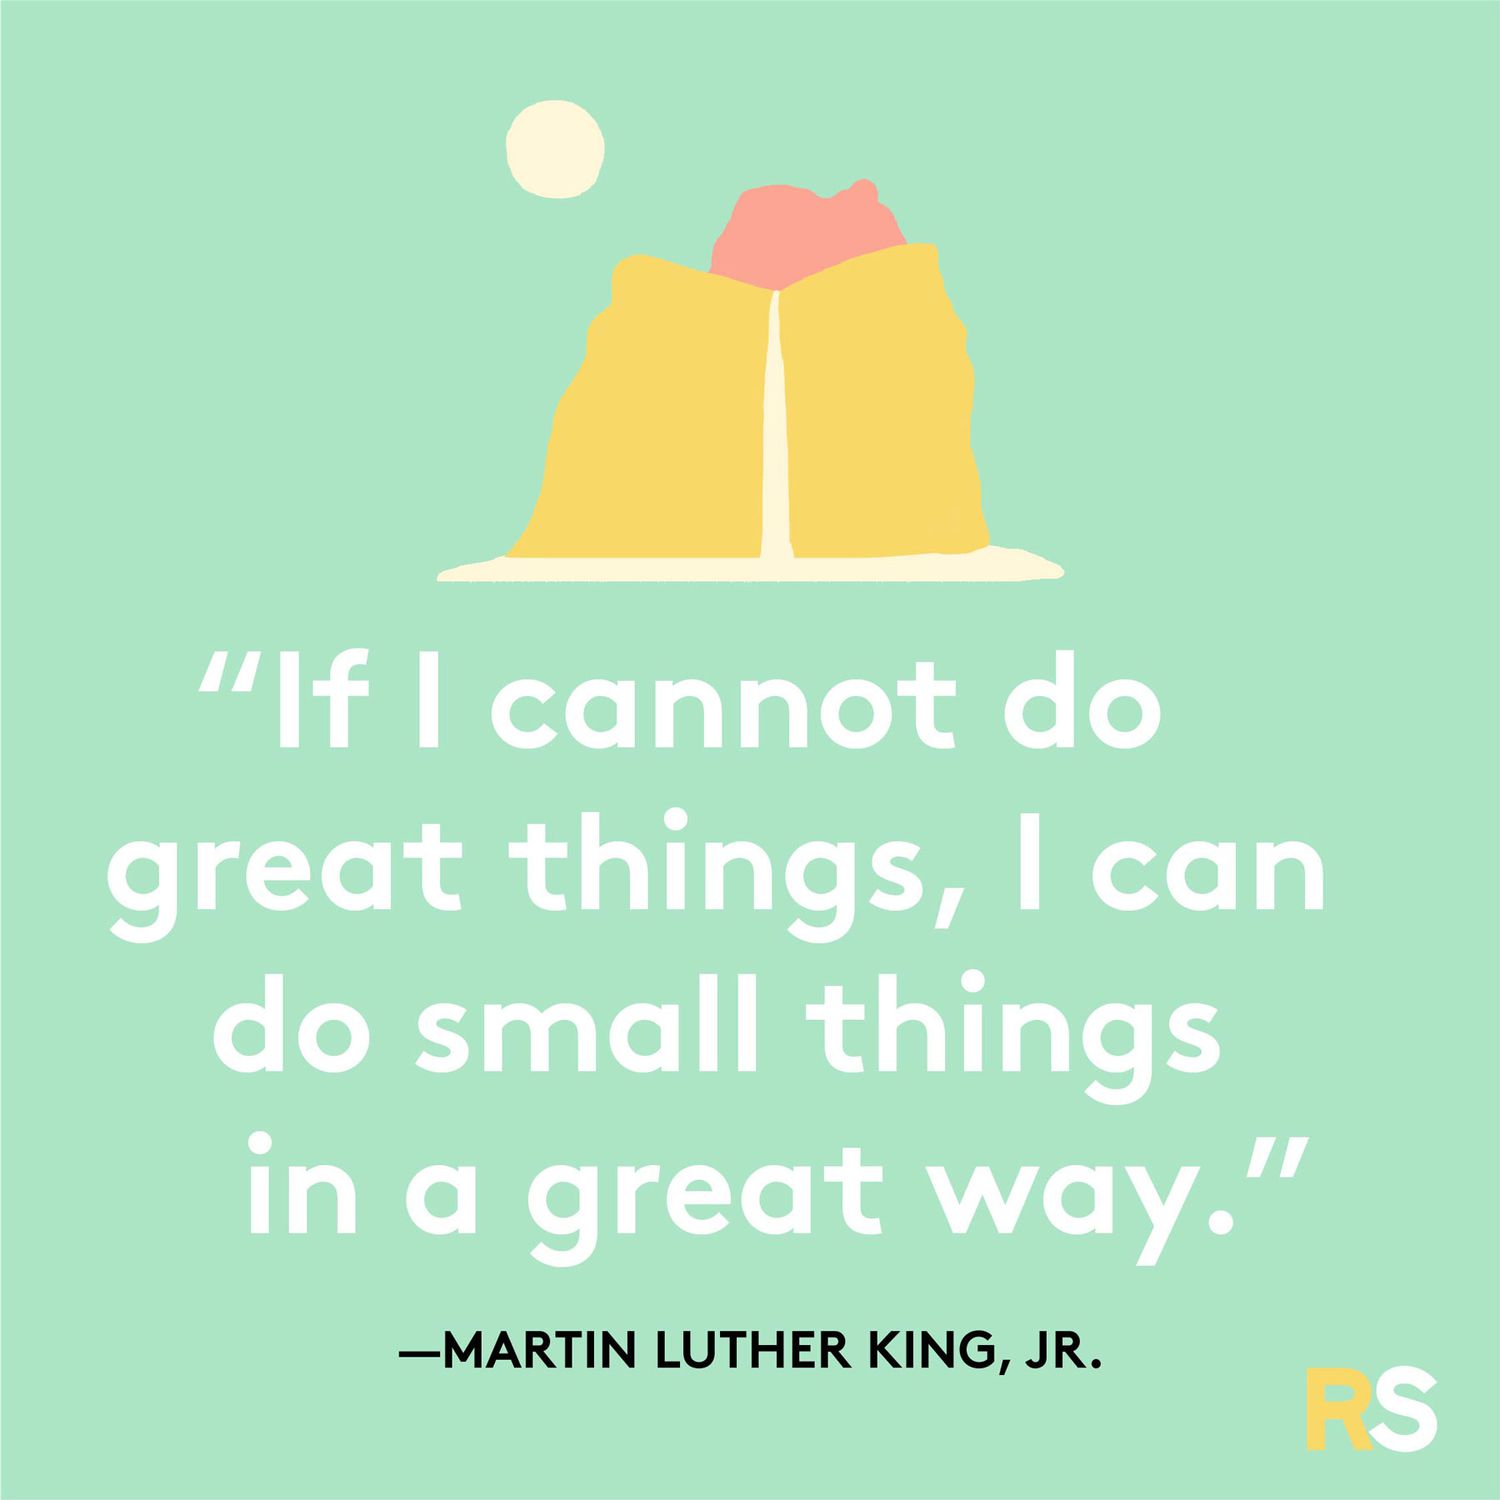 If I cannot do great things, I can do small things in a great way.